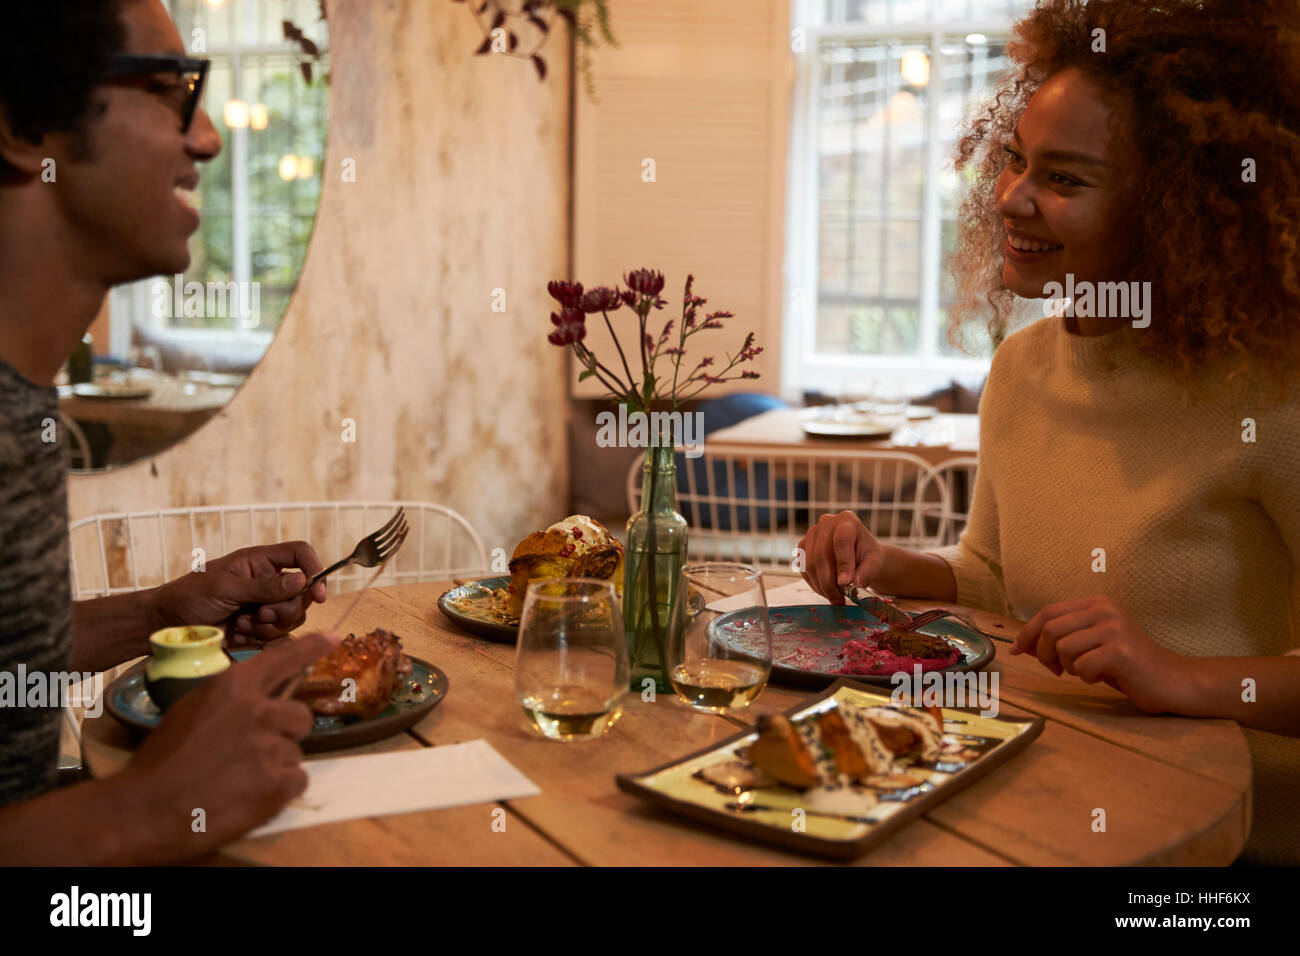 Young Couple Enjoying Meal On Date In Restaurant Stock Photo